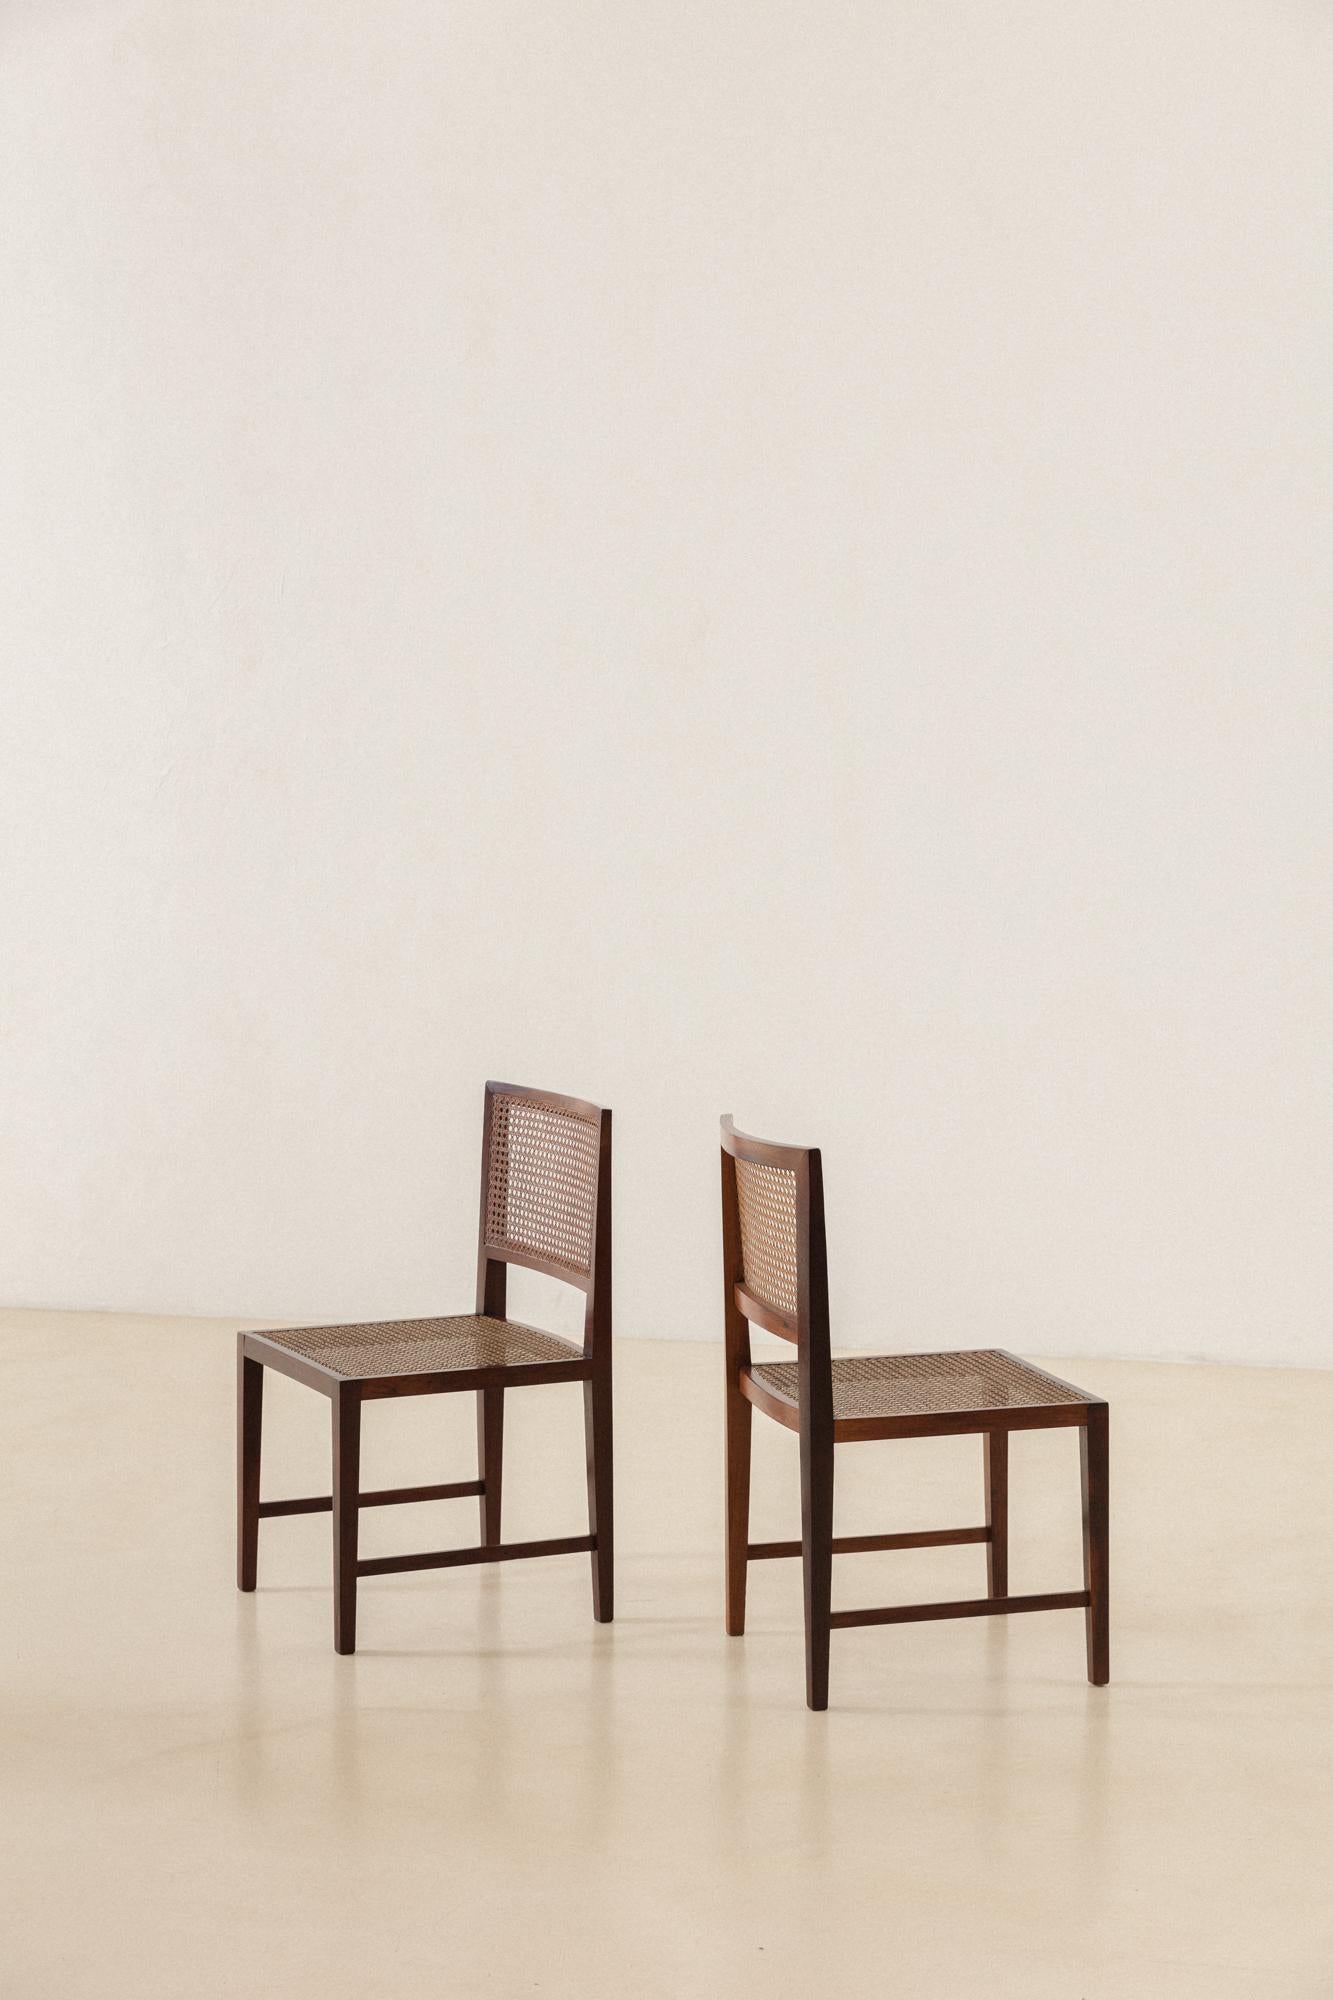 Rosewood and Cane Dining Chairs, M.L. Magalhães, 1960s, Midcentury Brazilian 5